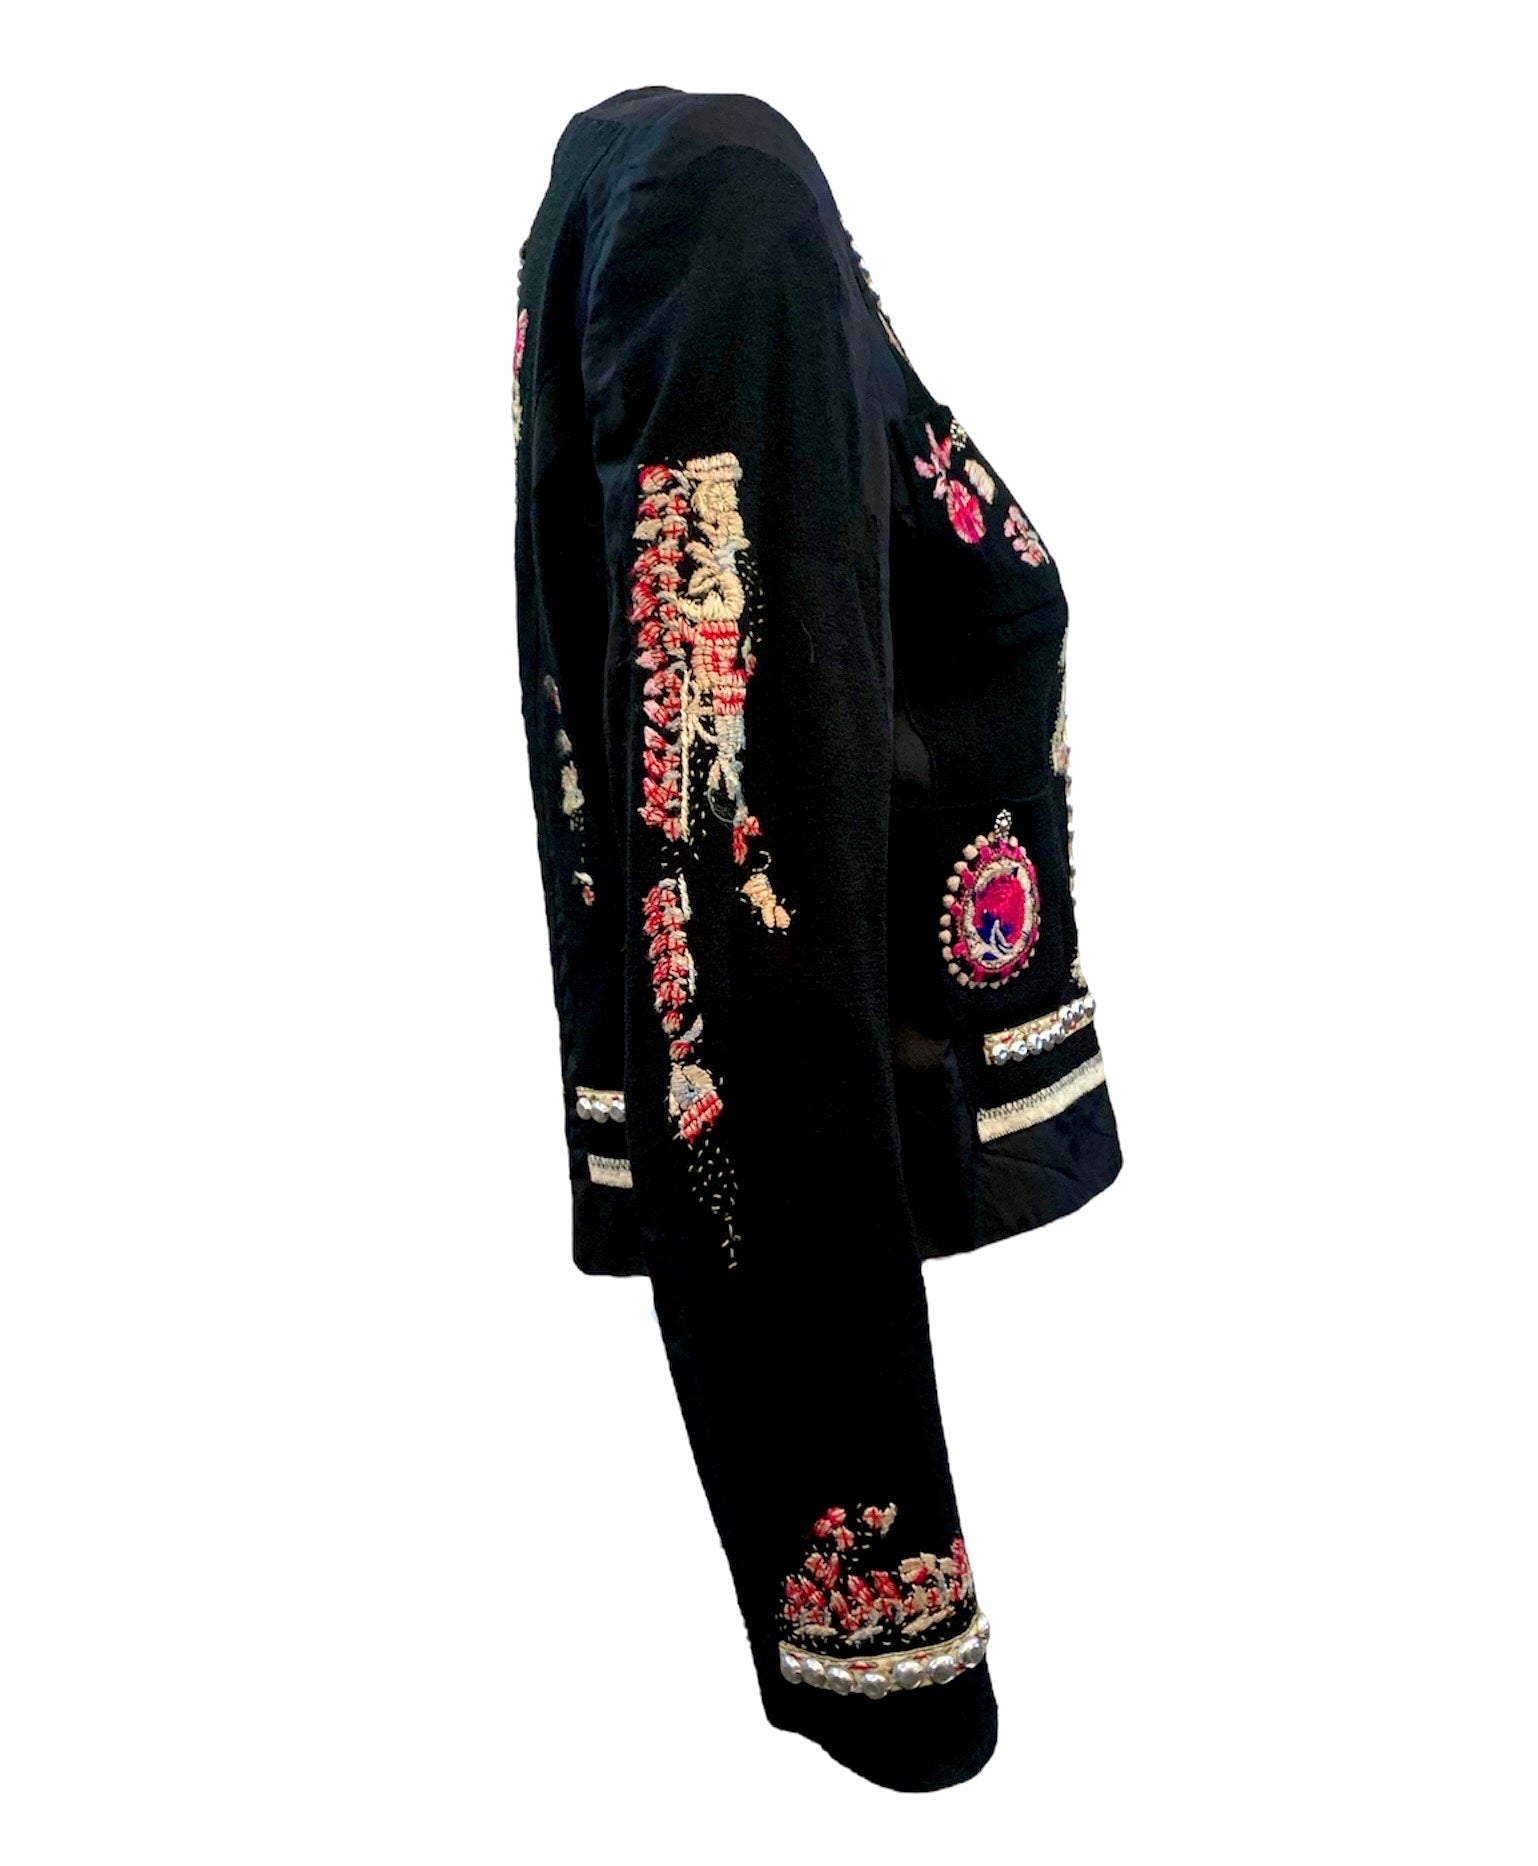 Moschino Early 2000s Embroidered Studded Folk Inspired Cropped Jacket SIDE 2 of 6